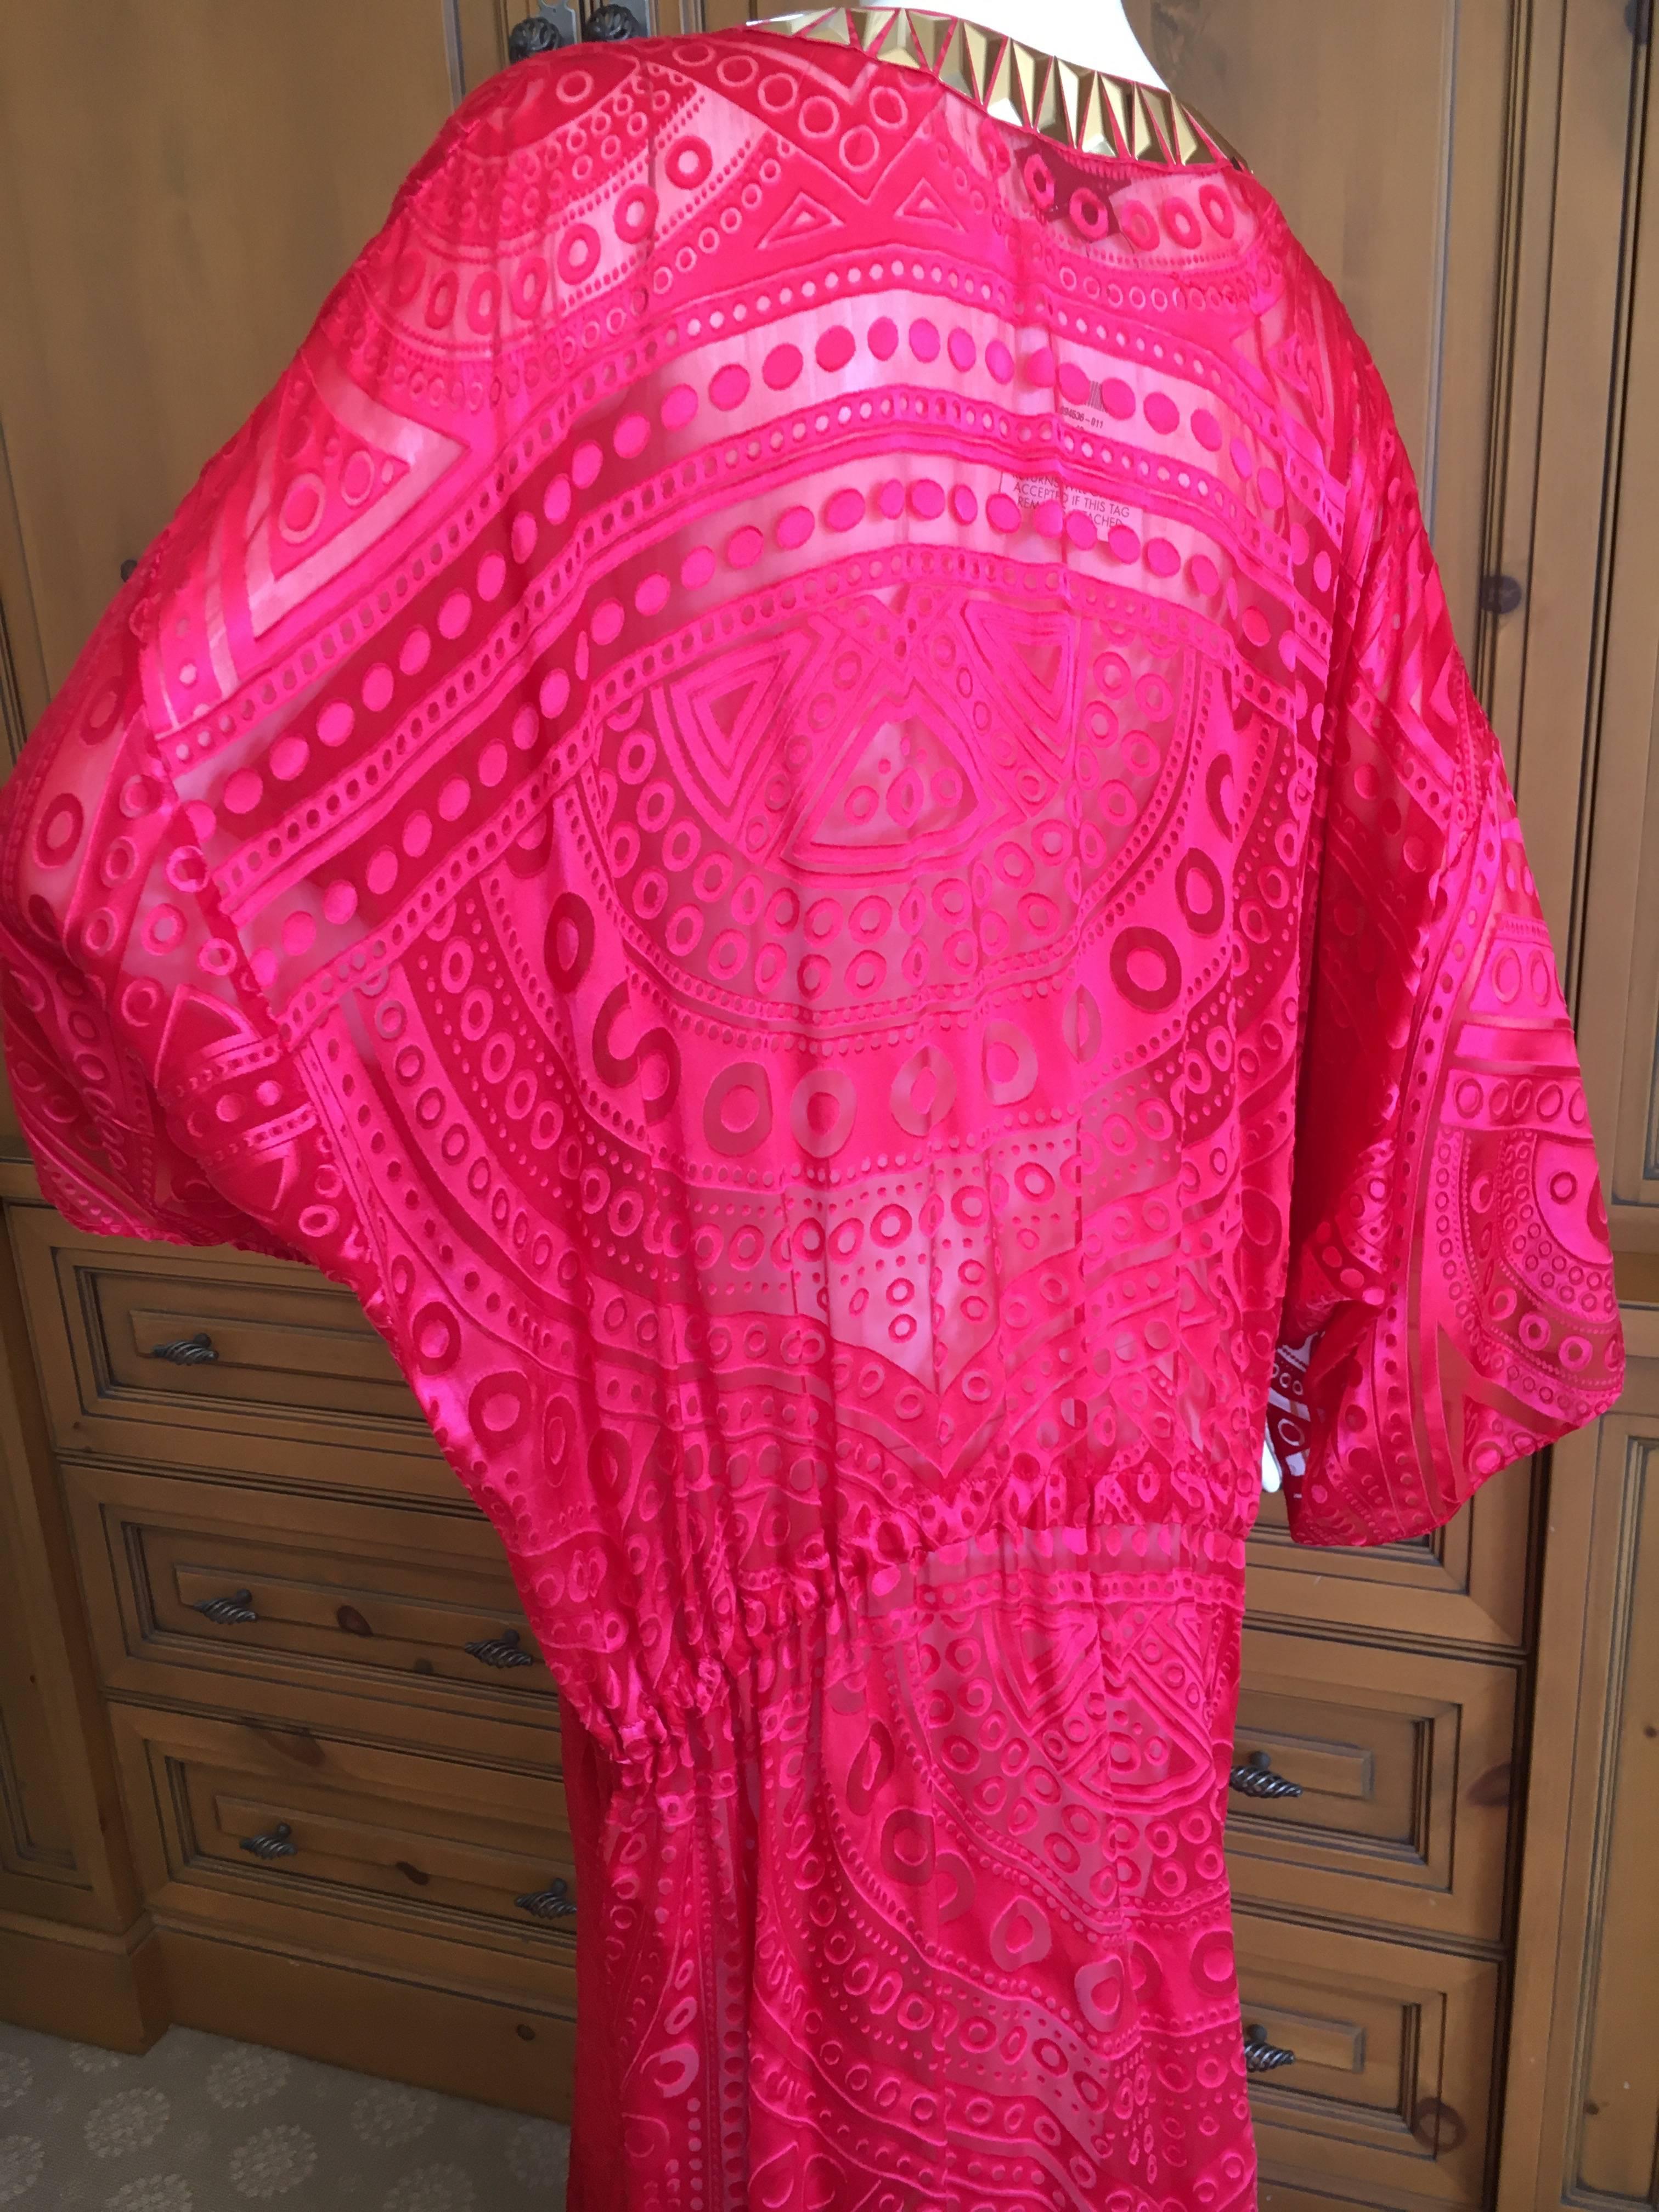 Roberto Cavalli Sheer Red Caftan with Gold Embellishents for Just Cavalli NWT 2